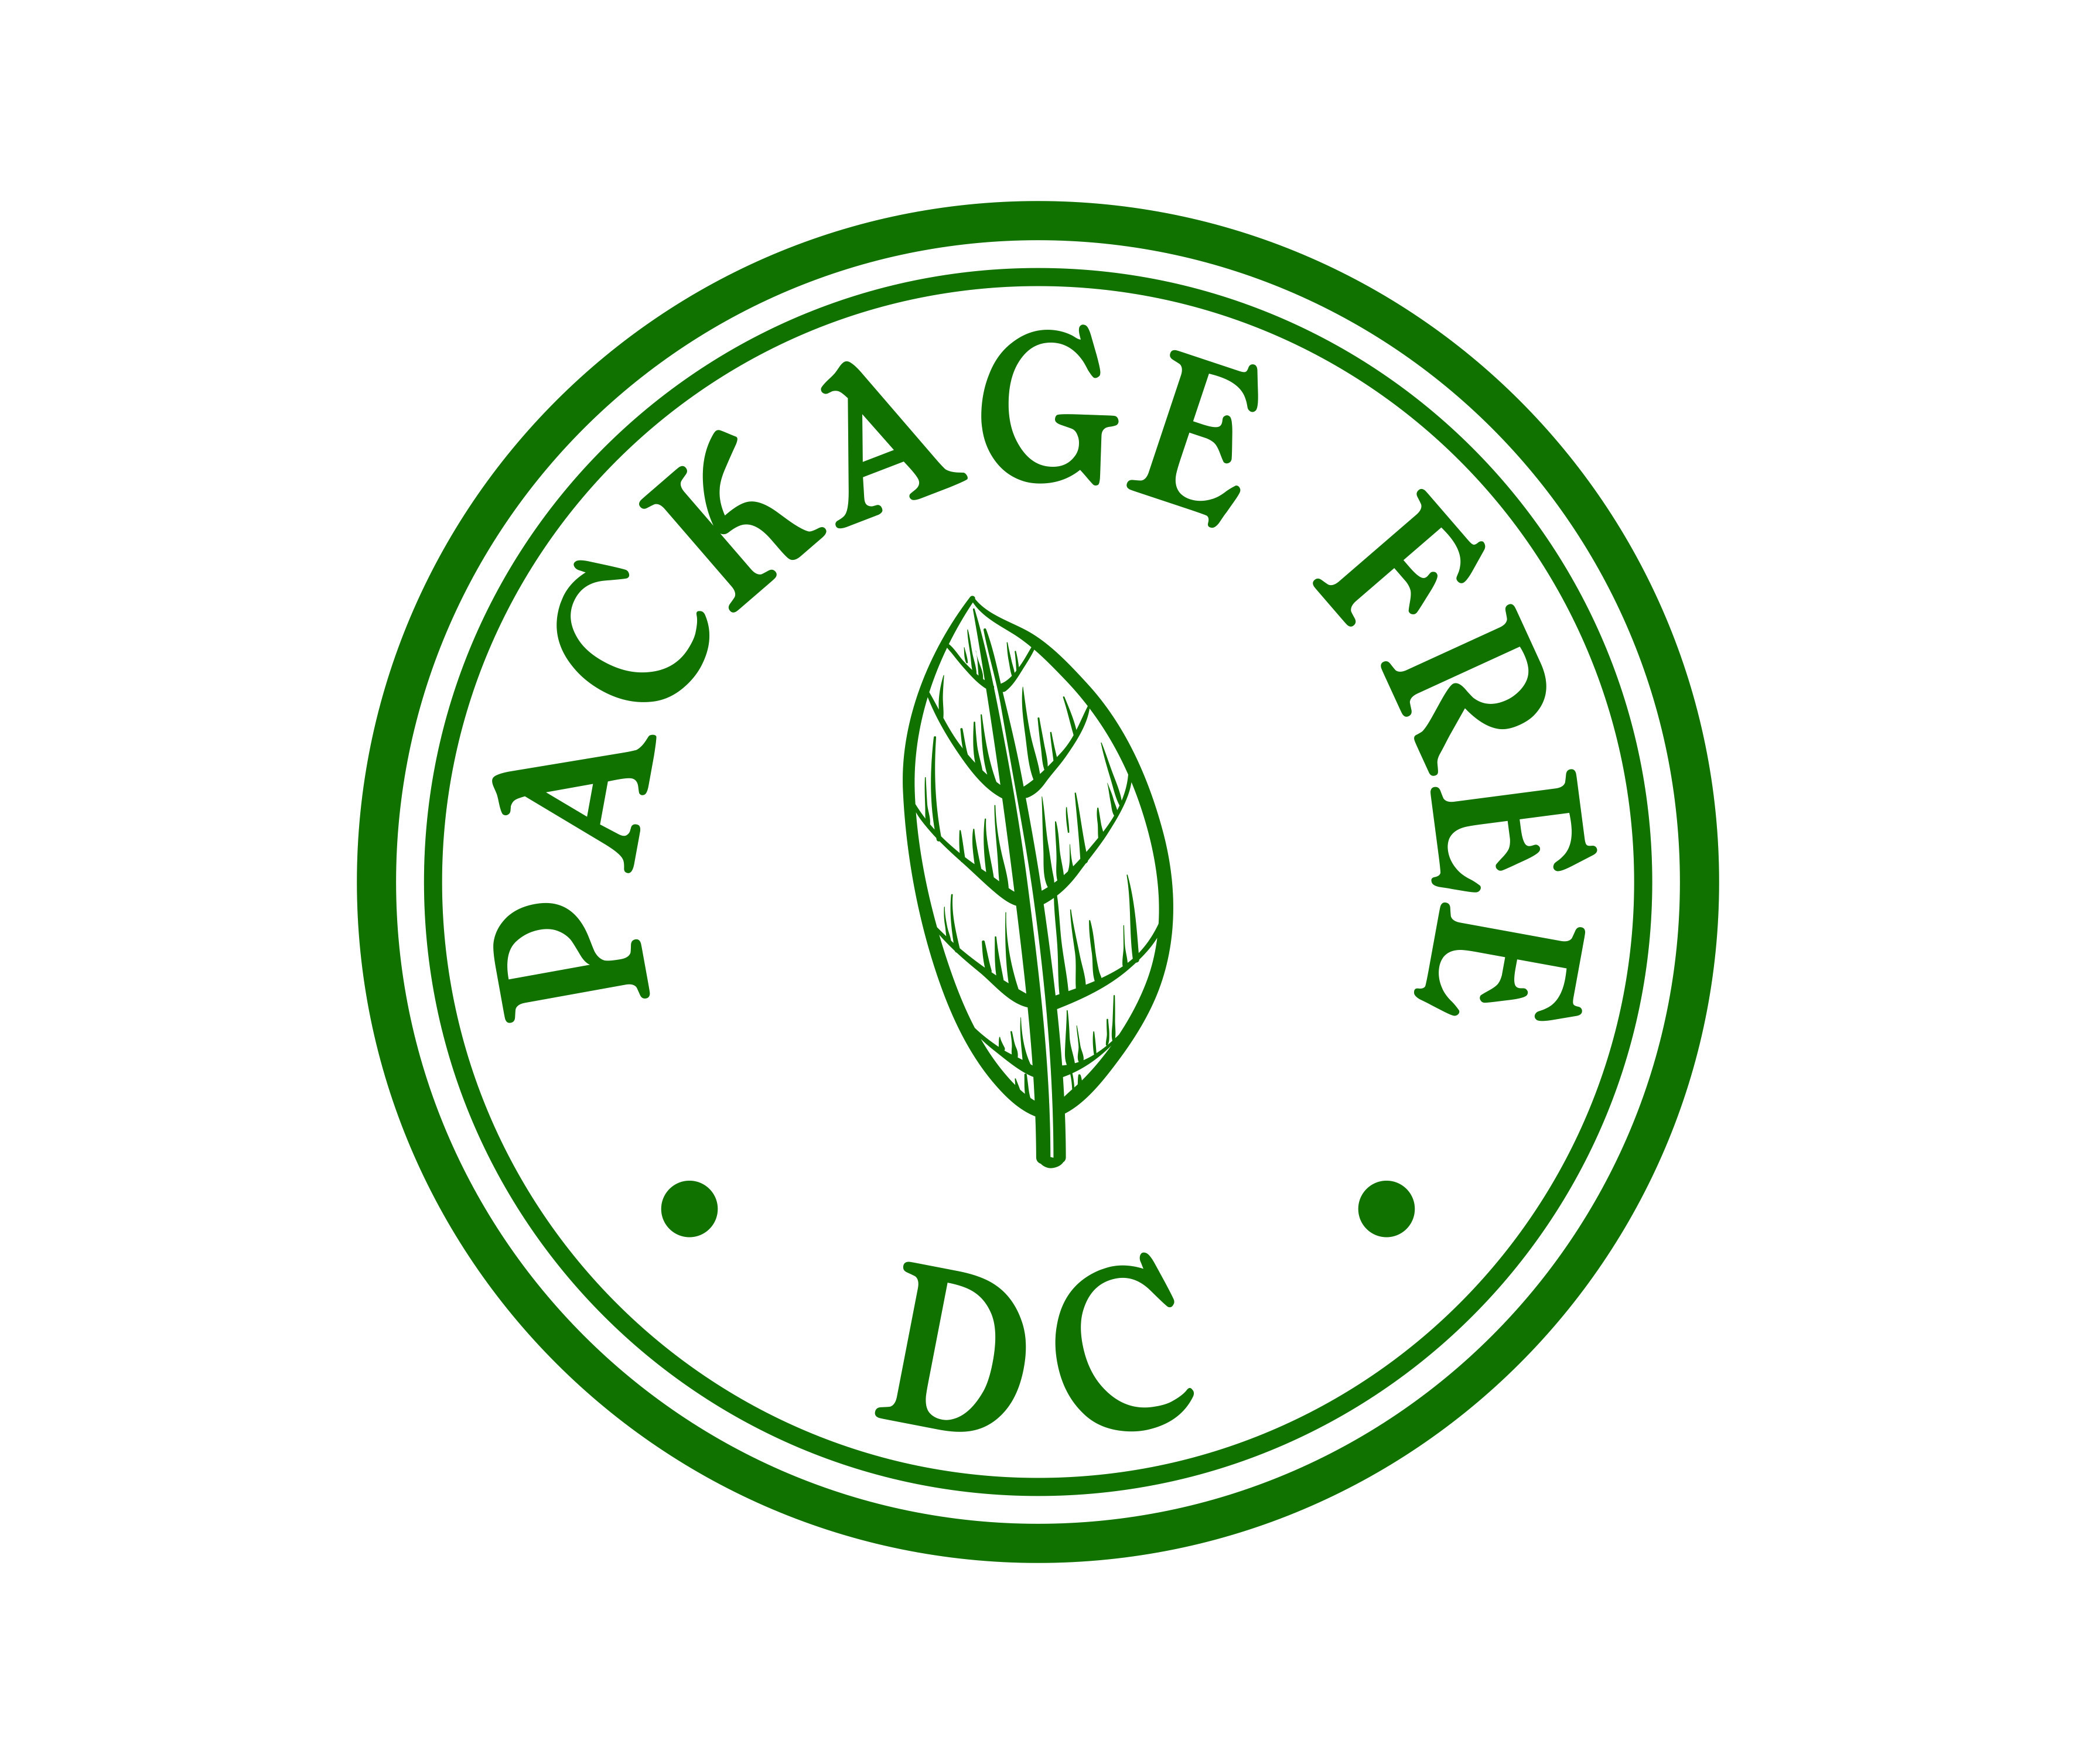 Package Free DC